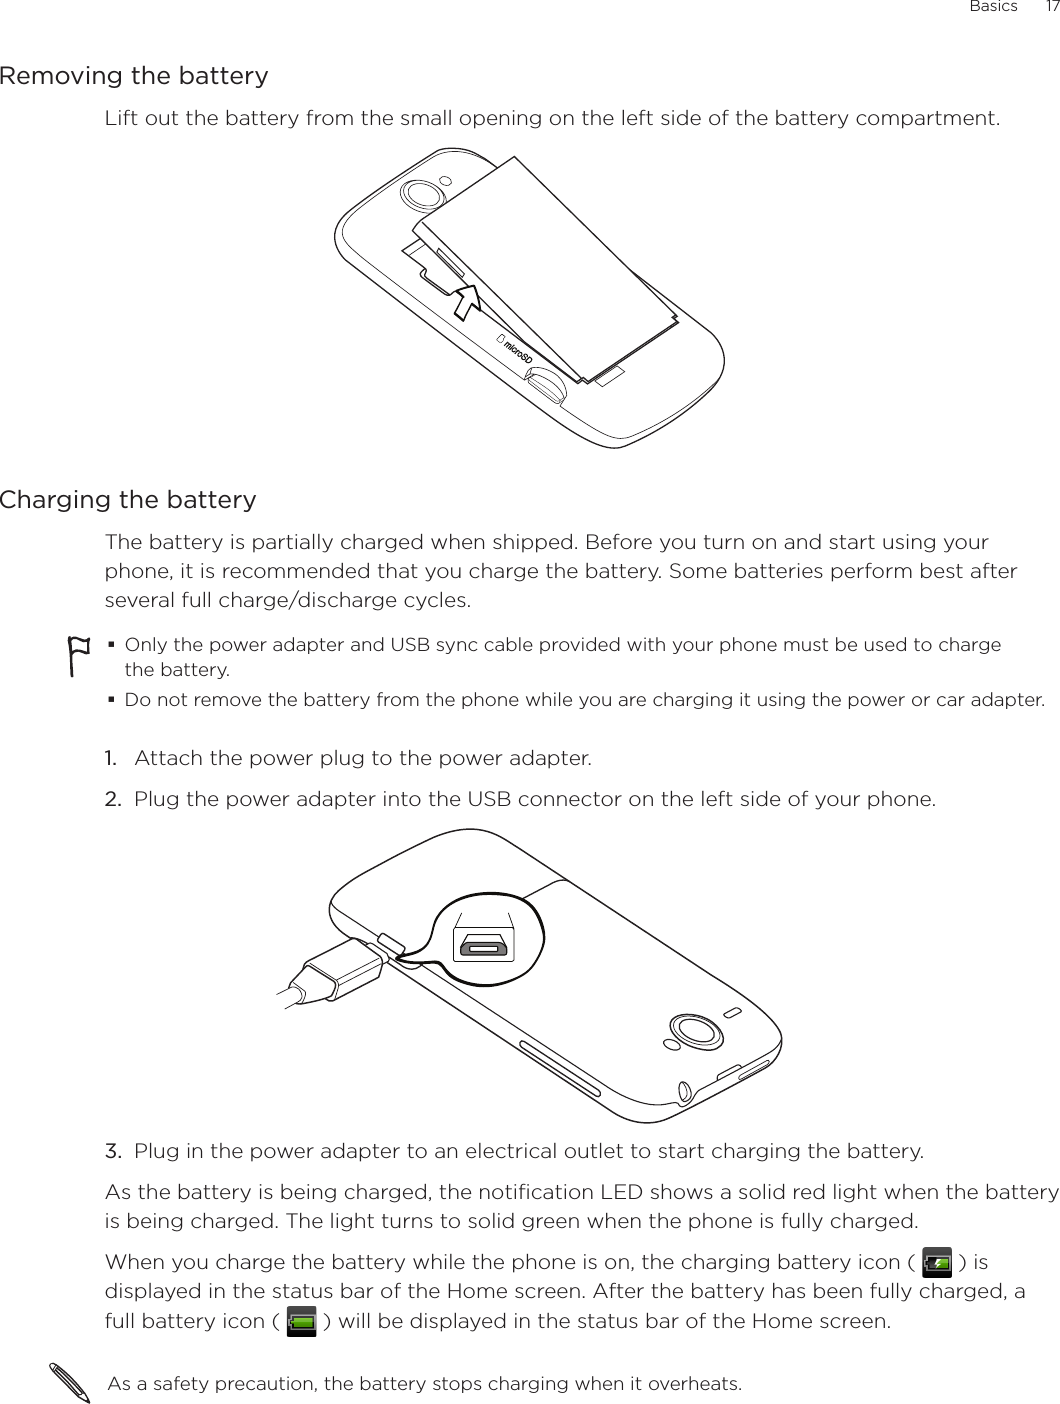 Basics      17Removing the batteryLift out the battery from the small opening on the left side of the battery compartment.Charging the batteryThe battery is partially charged when shipped. Before you turn on and start using your phone, it is recommended that you charge the battery. Some batteries perform best after several full charge/discharge cycles.Only the power adapter and USB sync cable provided with your phone must be used to charge the battery.Do not remove the battery from the phone while you are charging it using the power or car adapter.1.  Attach the power plug to the power adapter.2.  Plug the power adapter into the USB connector on the left side of your phone.3.  Plug in the power adapter to an electrical outlet to start charging the battery.As the battery is being charged, the notification LED shows a solid red light when the battery is being charged. The light turns to solid green when the phone is fully charged.When you charge the battery while the phone is on, the charging battery icon (   ) is displayed in the status bar of the Home screen. After the battery has been fully charged, a full battery icon (   ) will be displayed in the status bar of the Home screen.As a safety precaution, the battery stops charging when it overheats. 